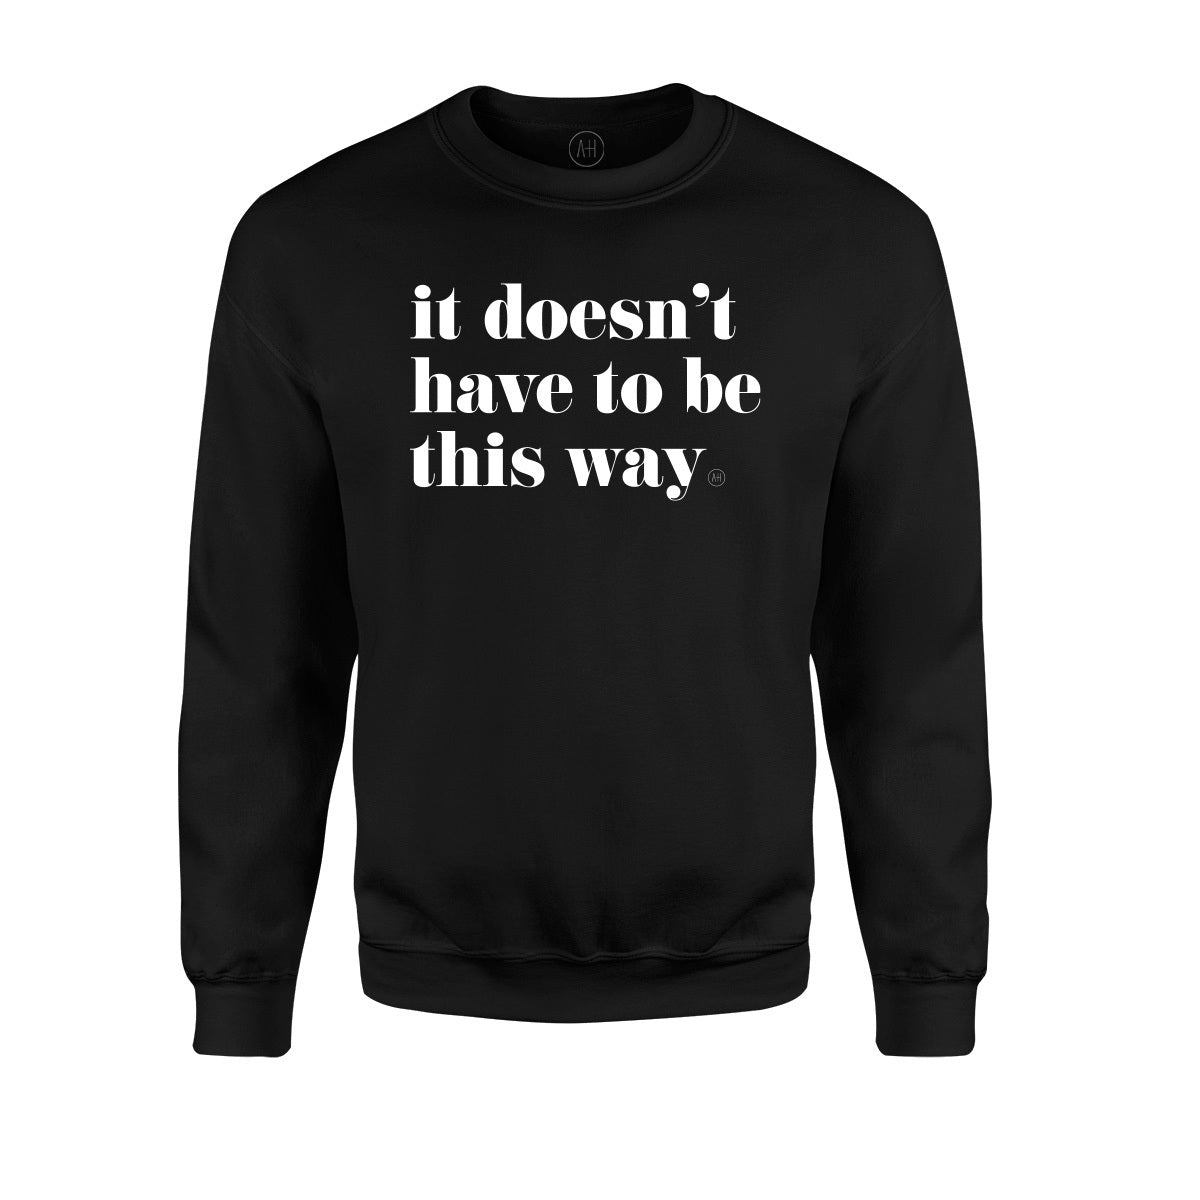 It Doesn't Have to Be This Way Unisex Crew Sweatshirt (Black)